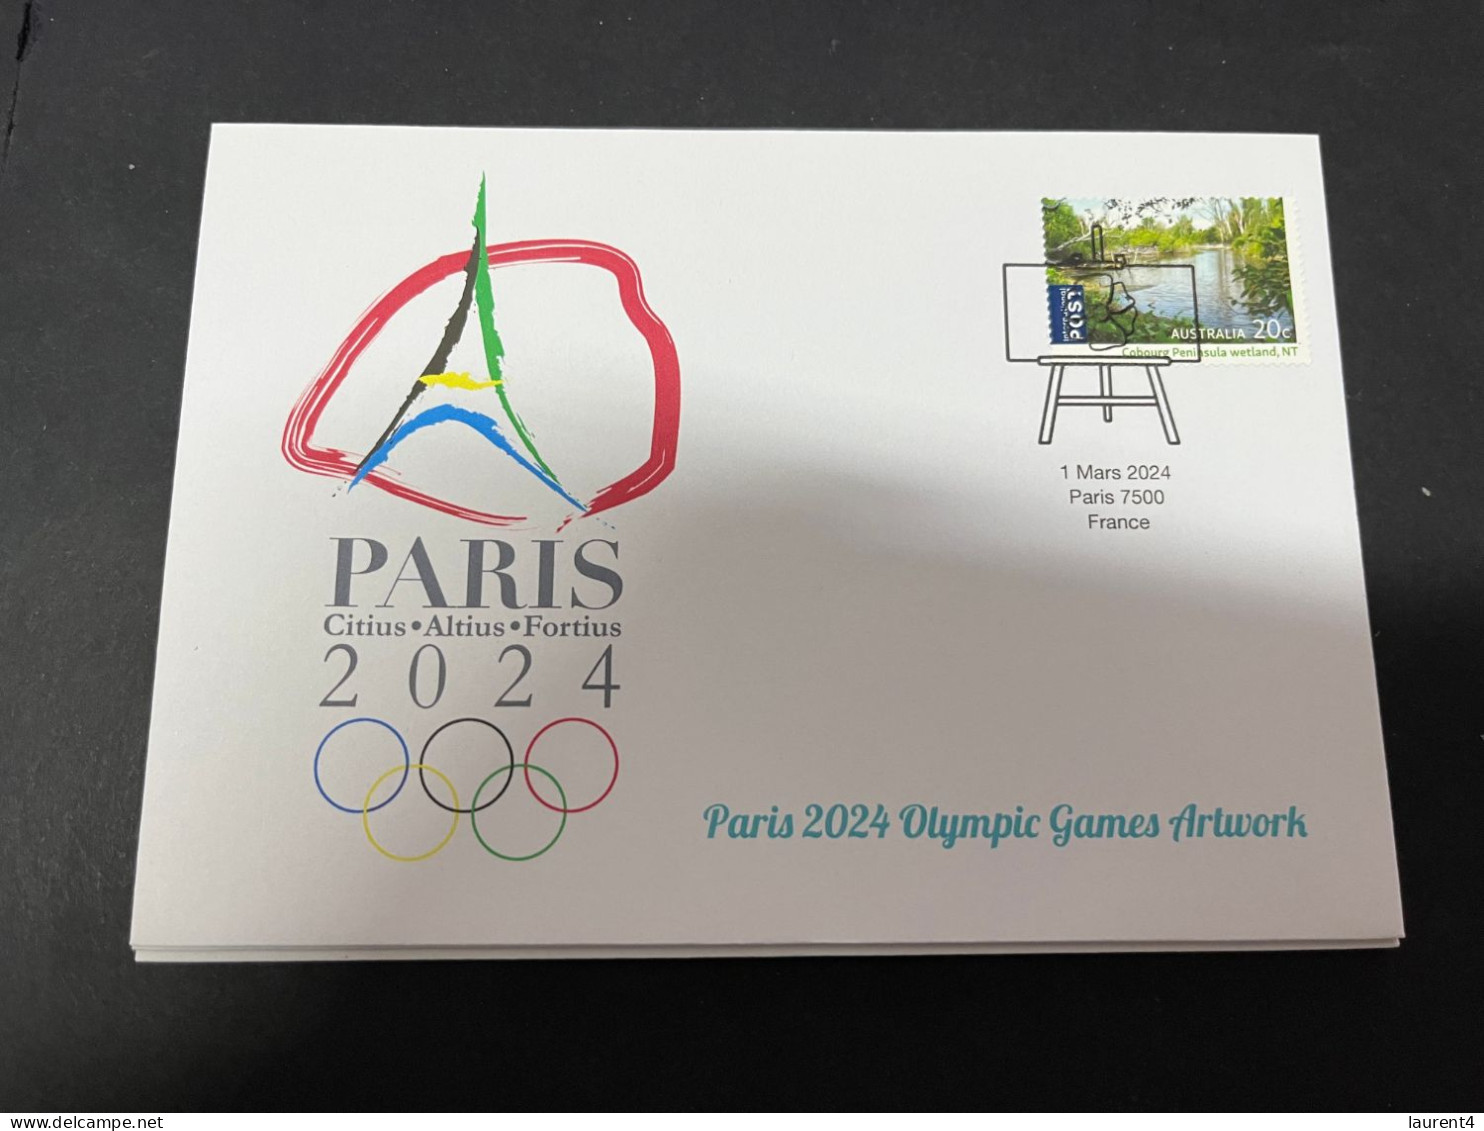 8-3-2024 (2 Y 30) Paris Olympic Games 2024 - 1 (of 12 Covers Series) For The Paris 2024 Olympic Games Artwork - Summer 2024: Paris